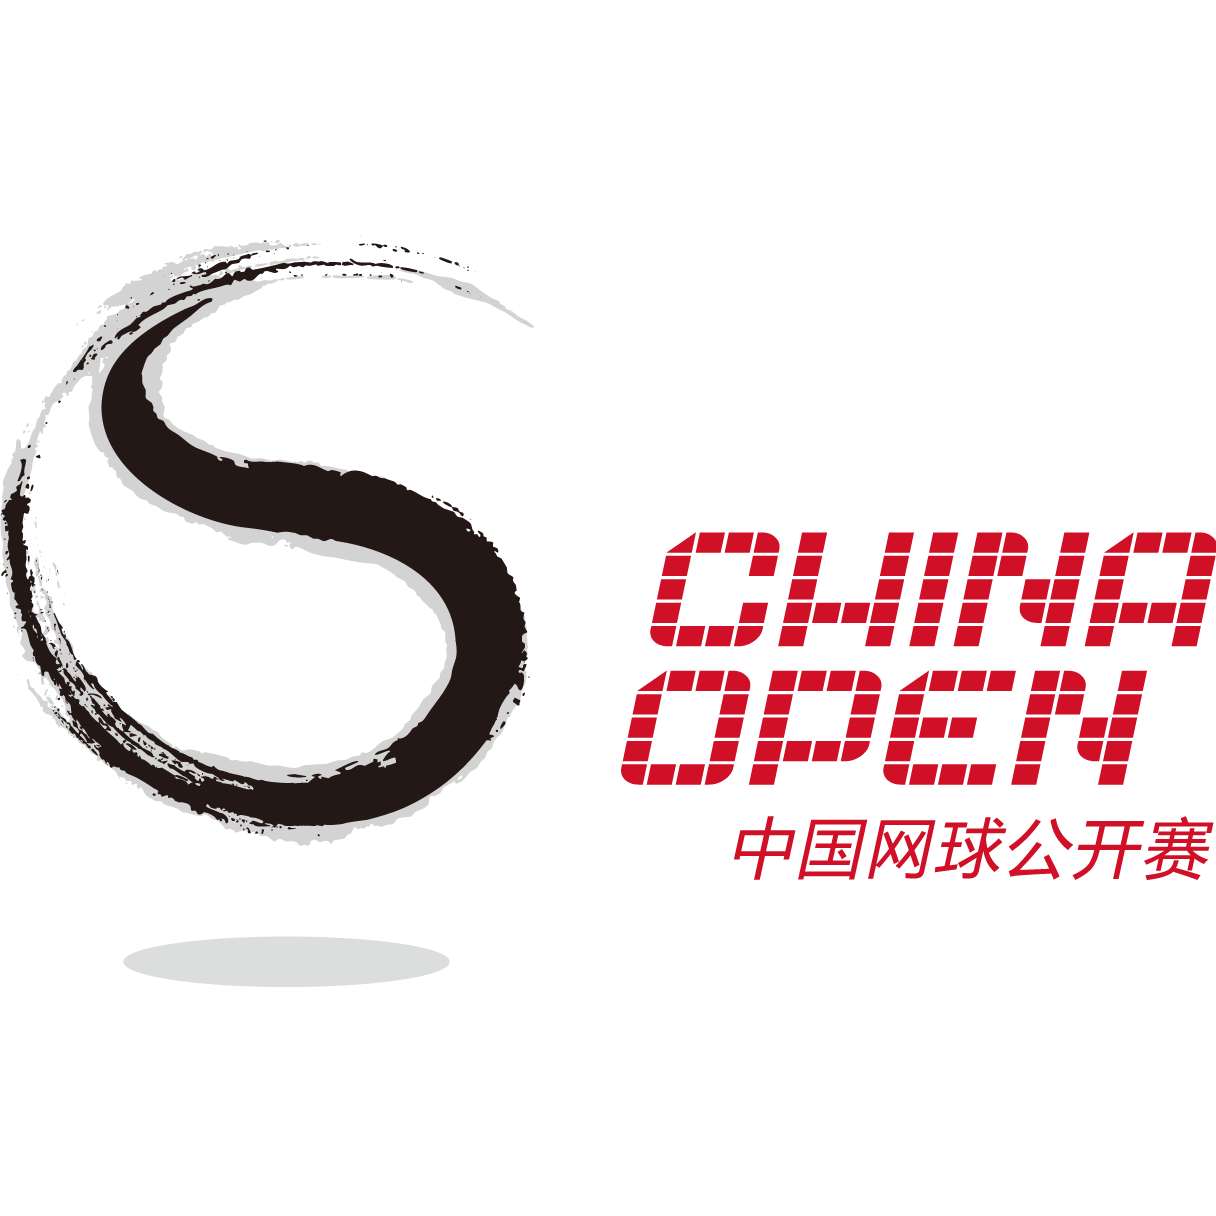 China Open tickets